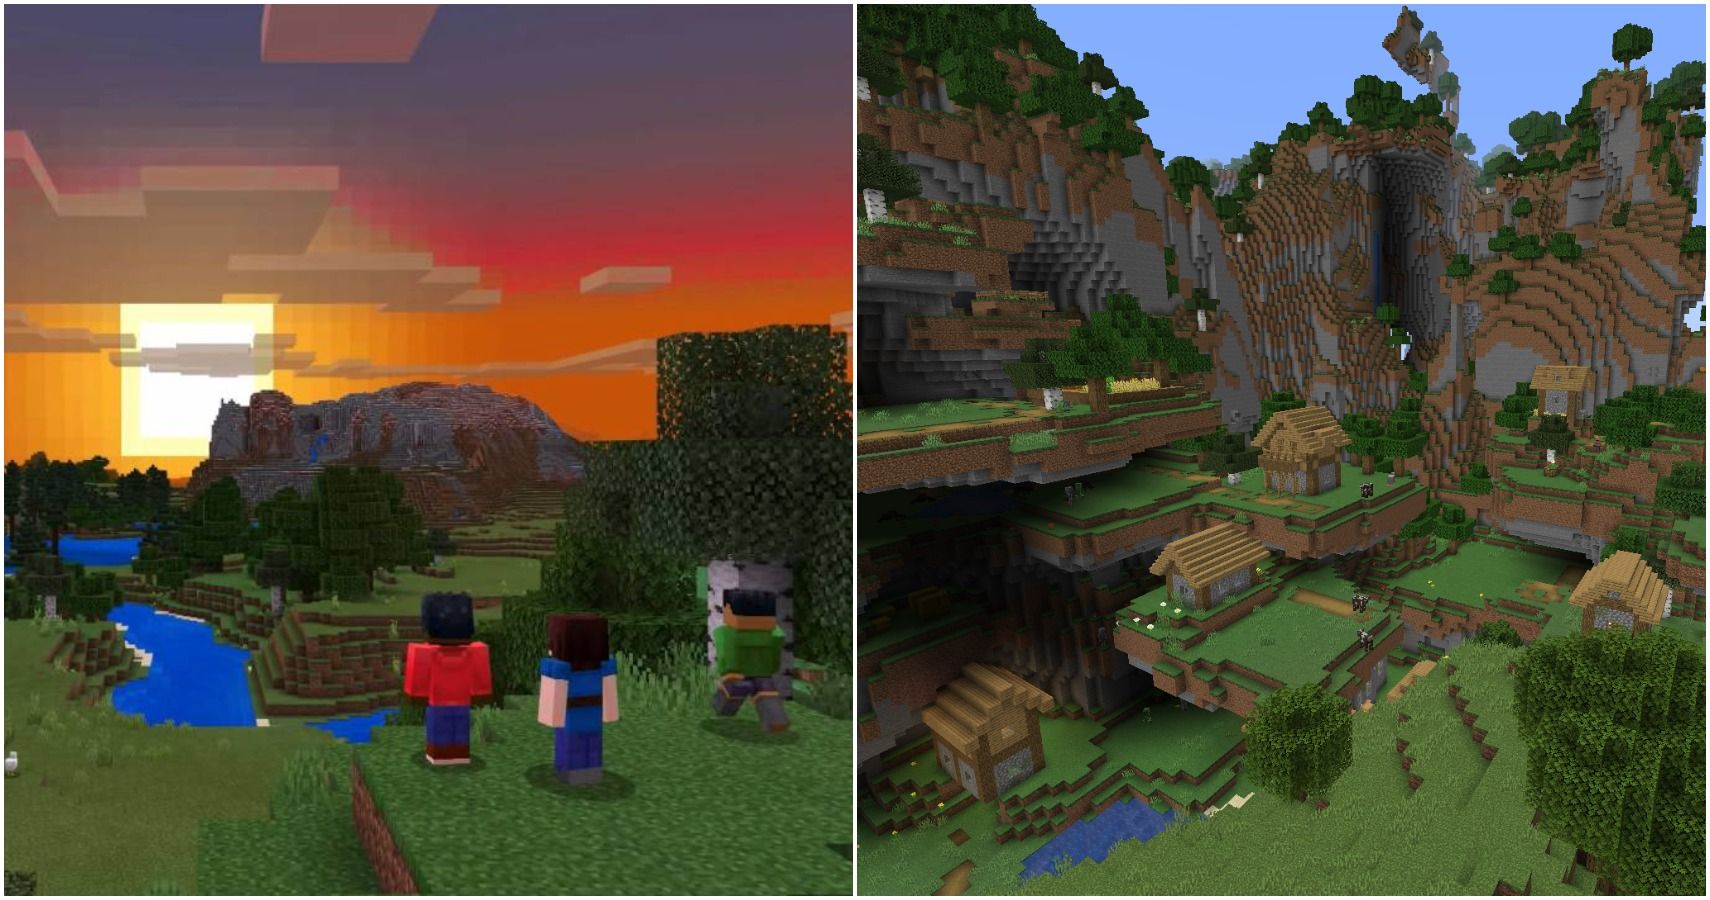 Minecraft: Bedrock Vs. Java - Which Edition Is Better?